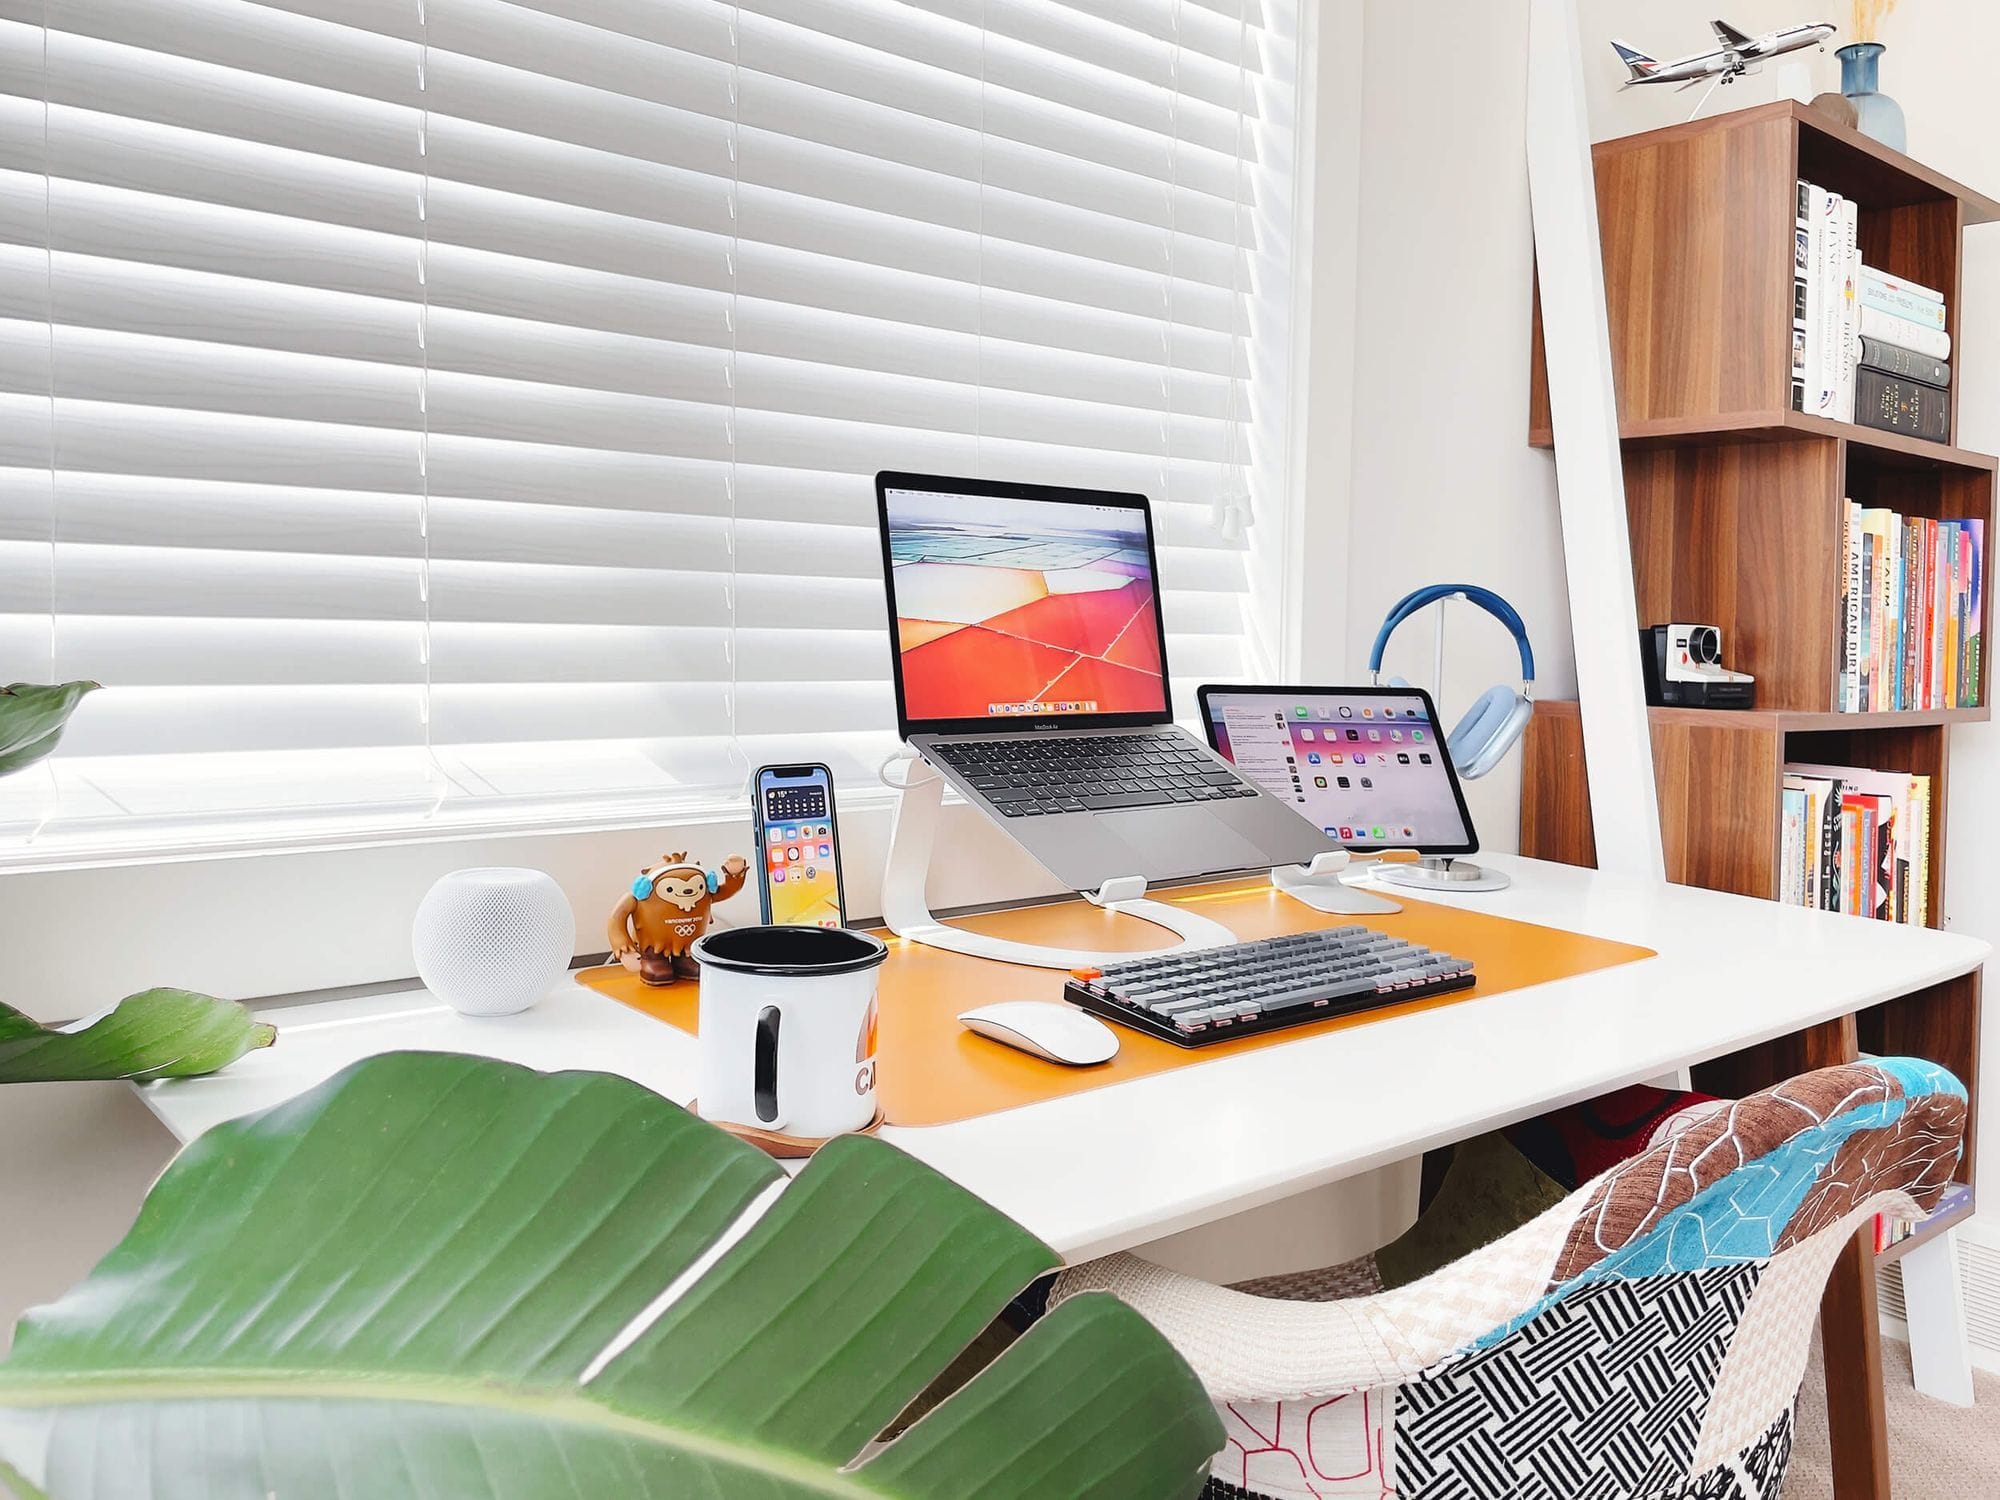 A bright and cozy home office setup with a laptop on a stand, tablet, smartphone, and a smart speaker on a white desk, complemented by a patterned chair and a bookshelf filled with various books and knick-knacks